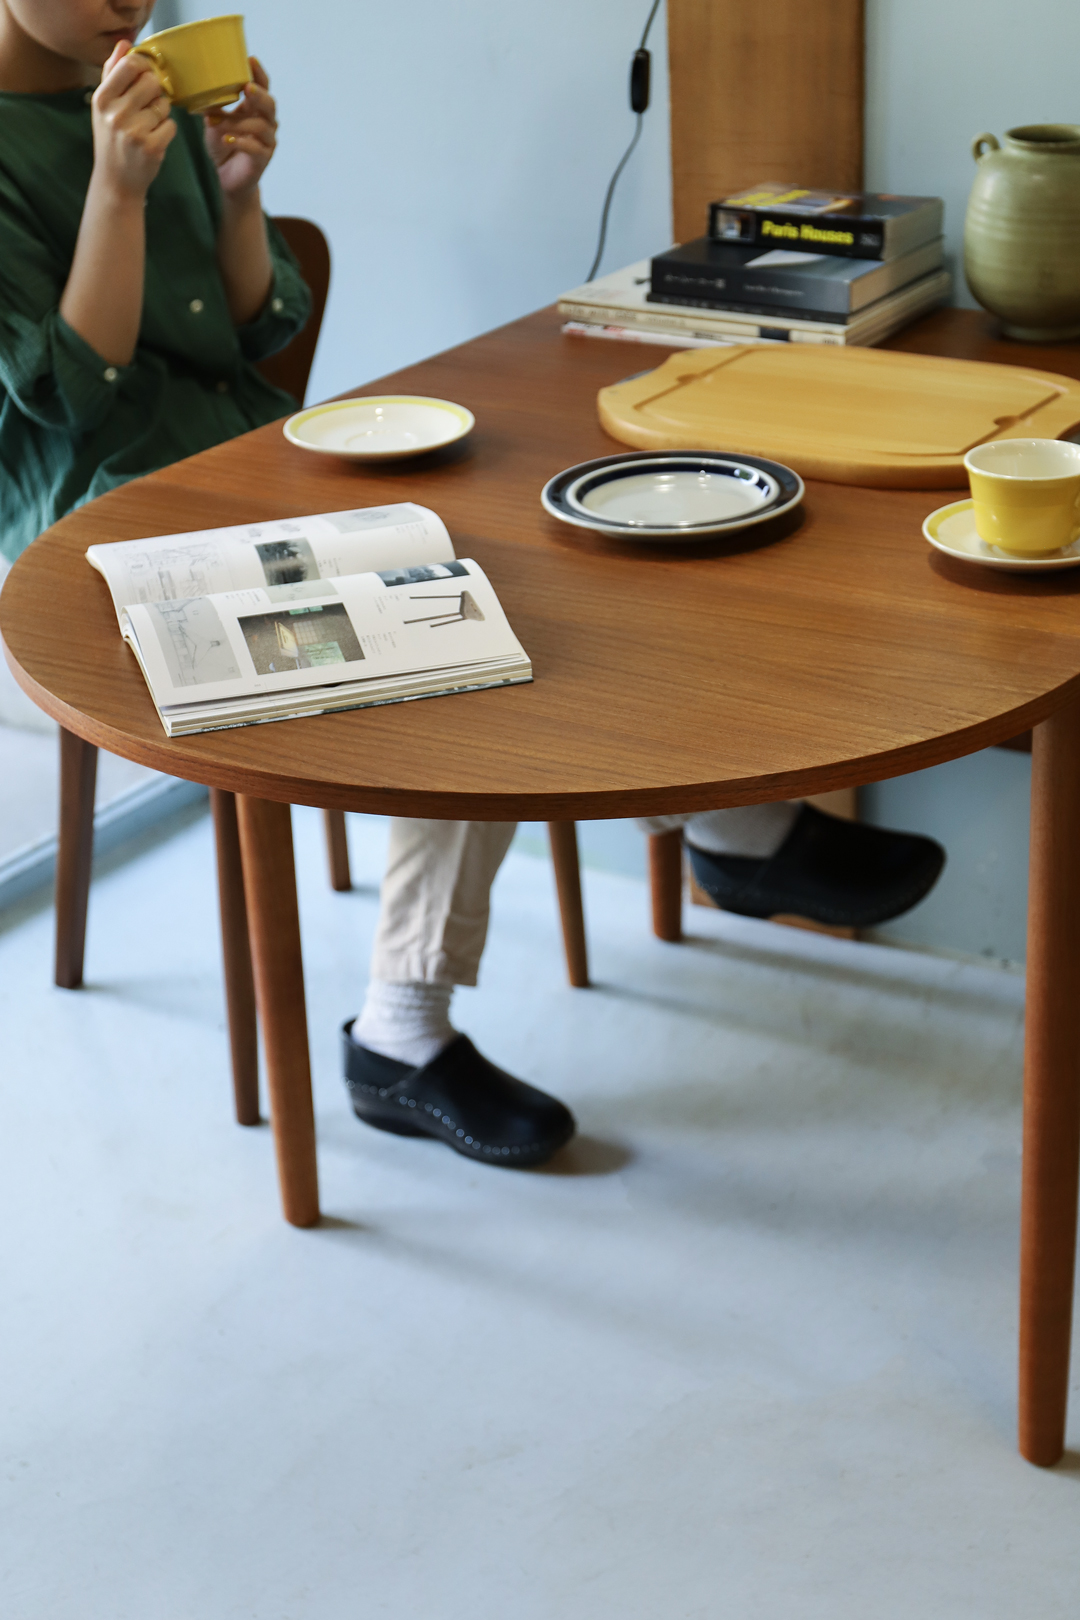 Danish Vintage Extension Dining Table/デンマーク ヴィンテージ エクステンション ダイニングテーブル チーク材 北欧モダン